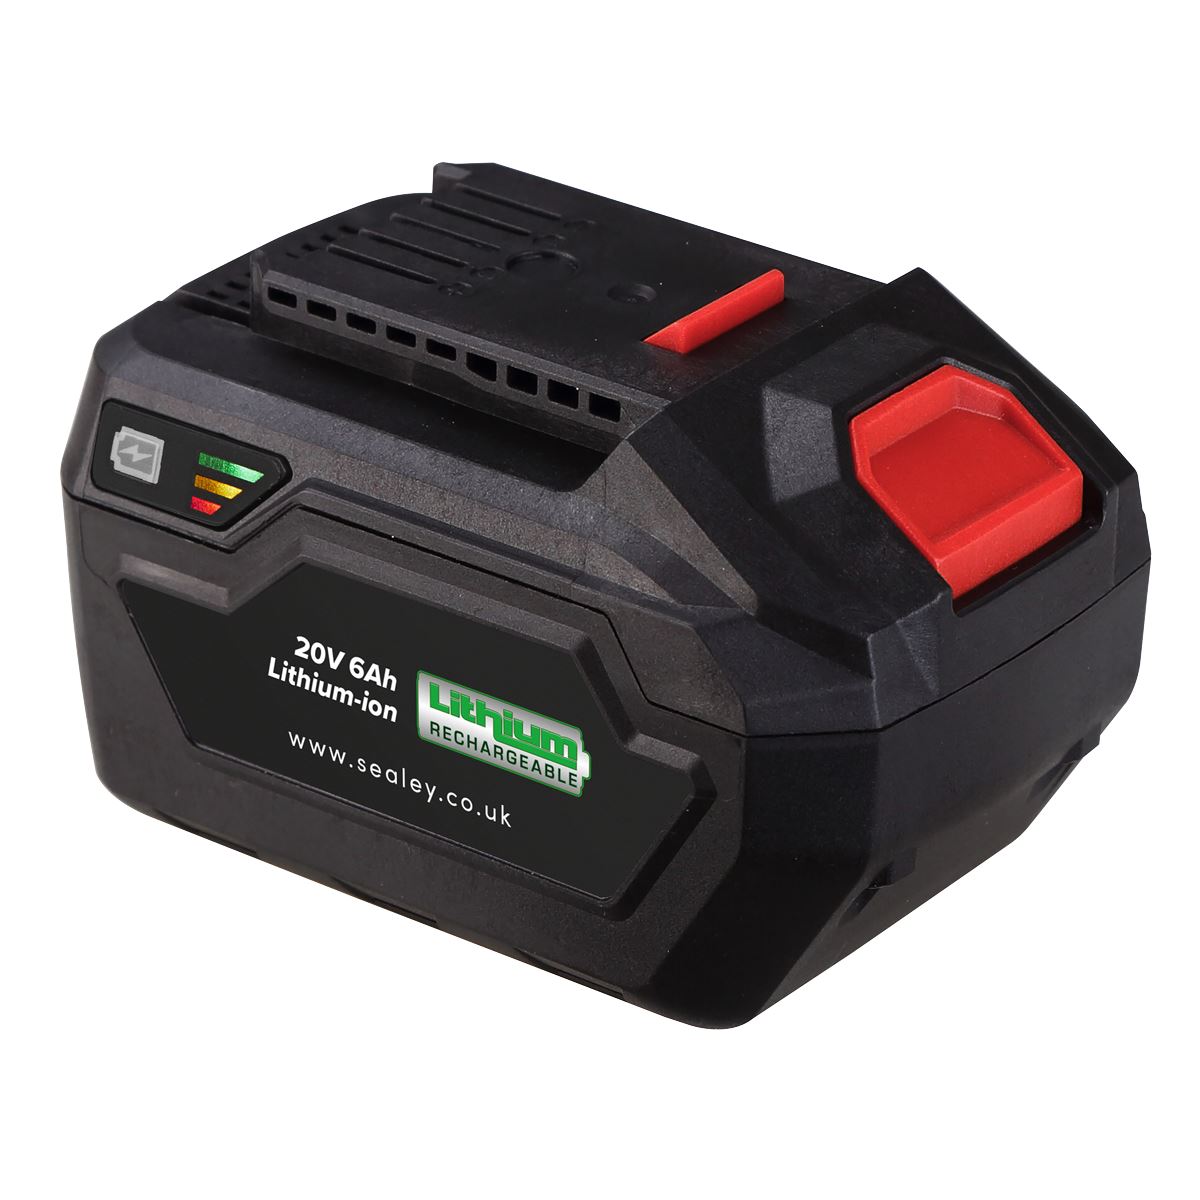 Sealey Power Tool Battery 20V 6Ah Lithium-ion for CP20V Series Tools